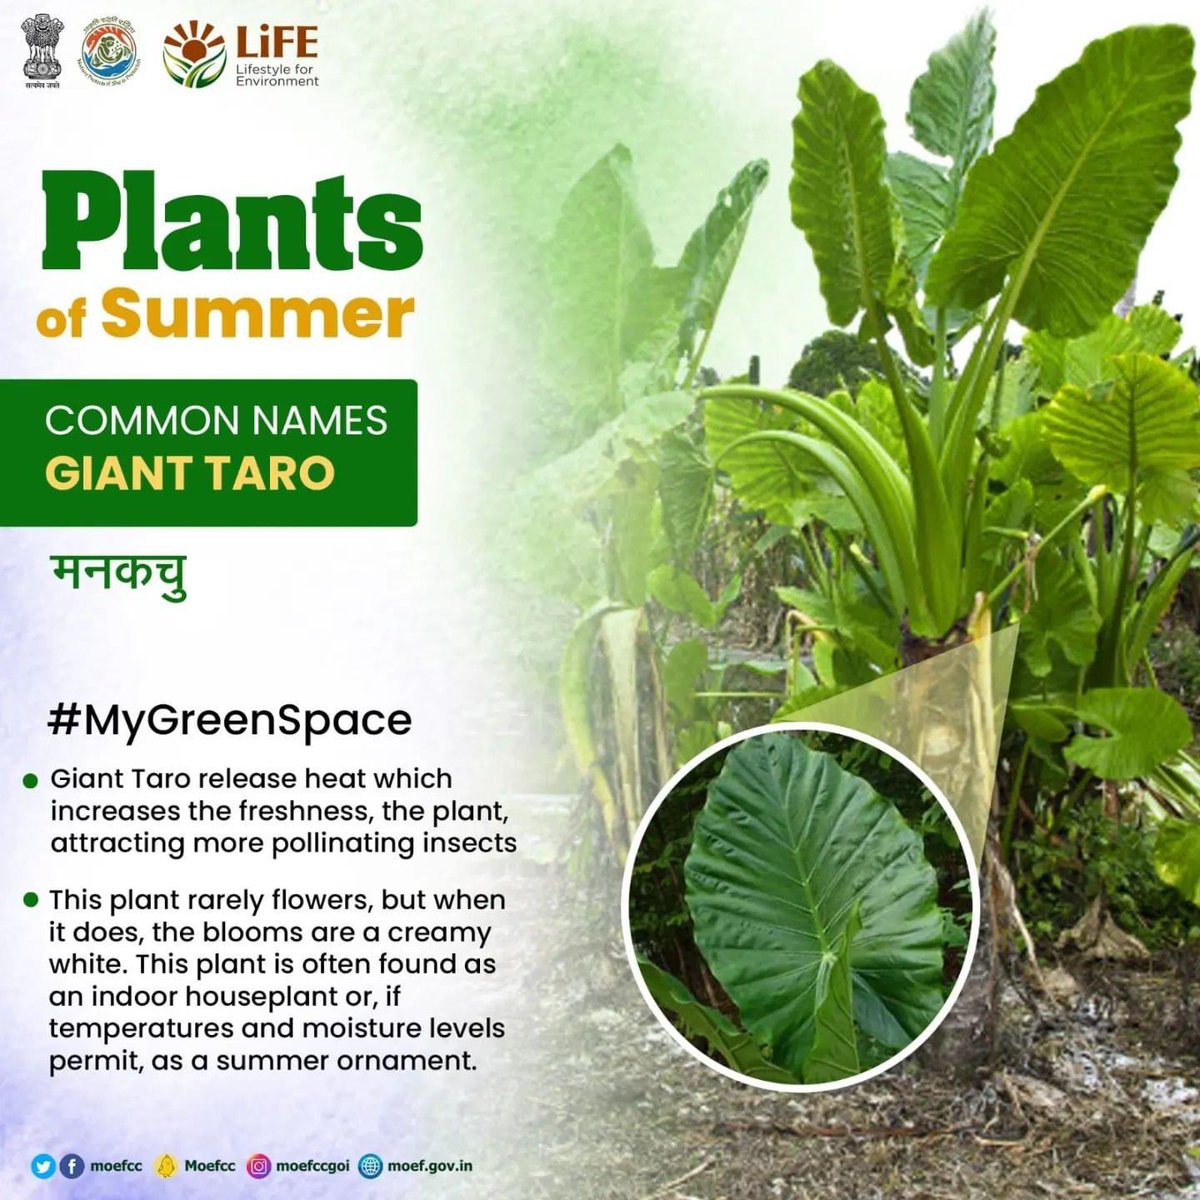 Make your summer refreshing by planting #PlantsofSummer in your indoor and outdoor spaces! #MyGreenSpace #ChooseLiFE #MissionLiFE